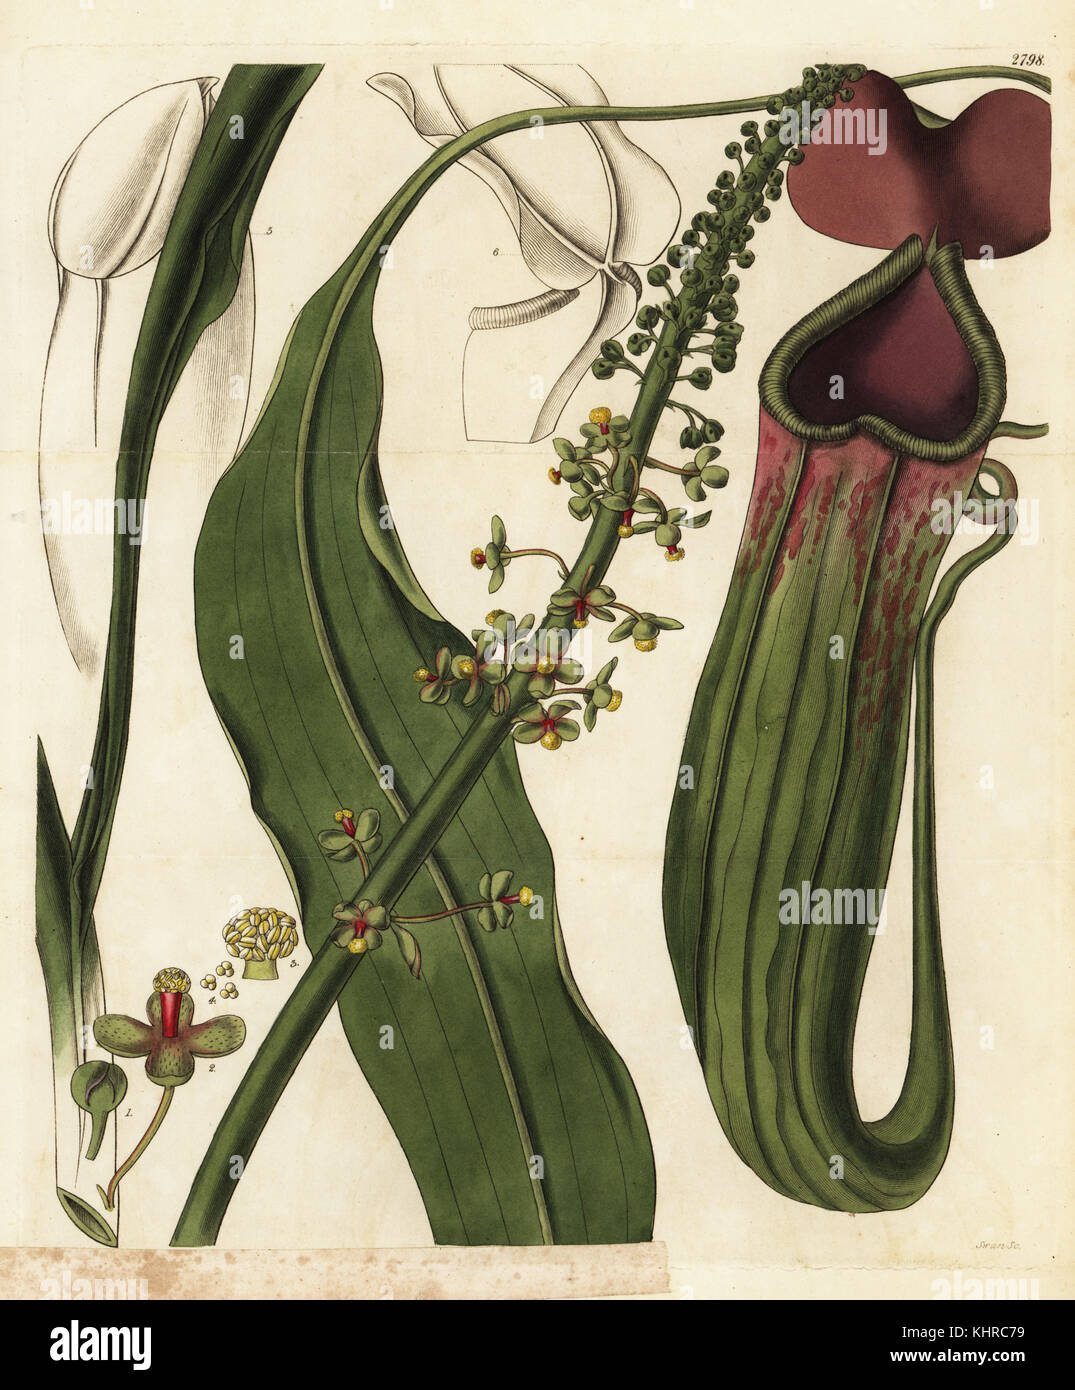 Nepenthes Also Known As Tropical Pitcher Plants, The Pitchers Of This Plant  Trap Insects That Are Then Digested As Food, Vintage Line Drawing Or  Engraving Illustration. Royalty Free SVG, Cliparts, Vectors, and